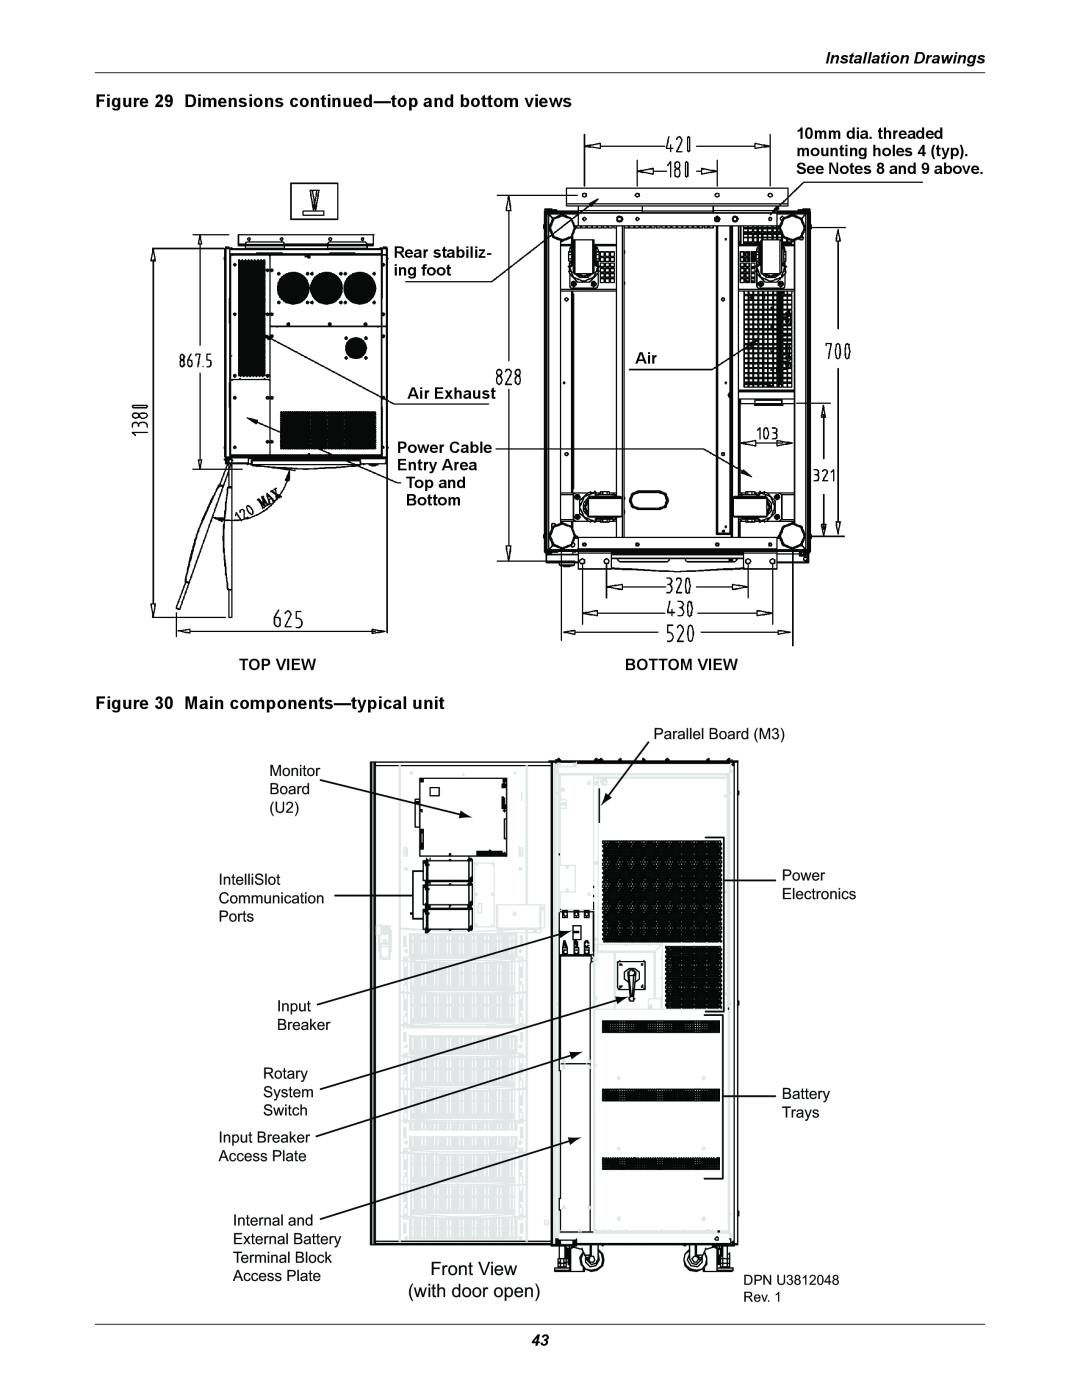 Emerson 208V, 10-30kVA installation manual Main components-typicalunit, Front View, with door open, Installation Drawings 